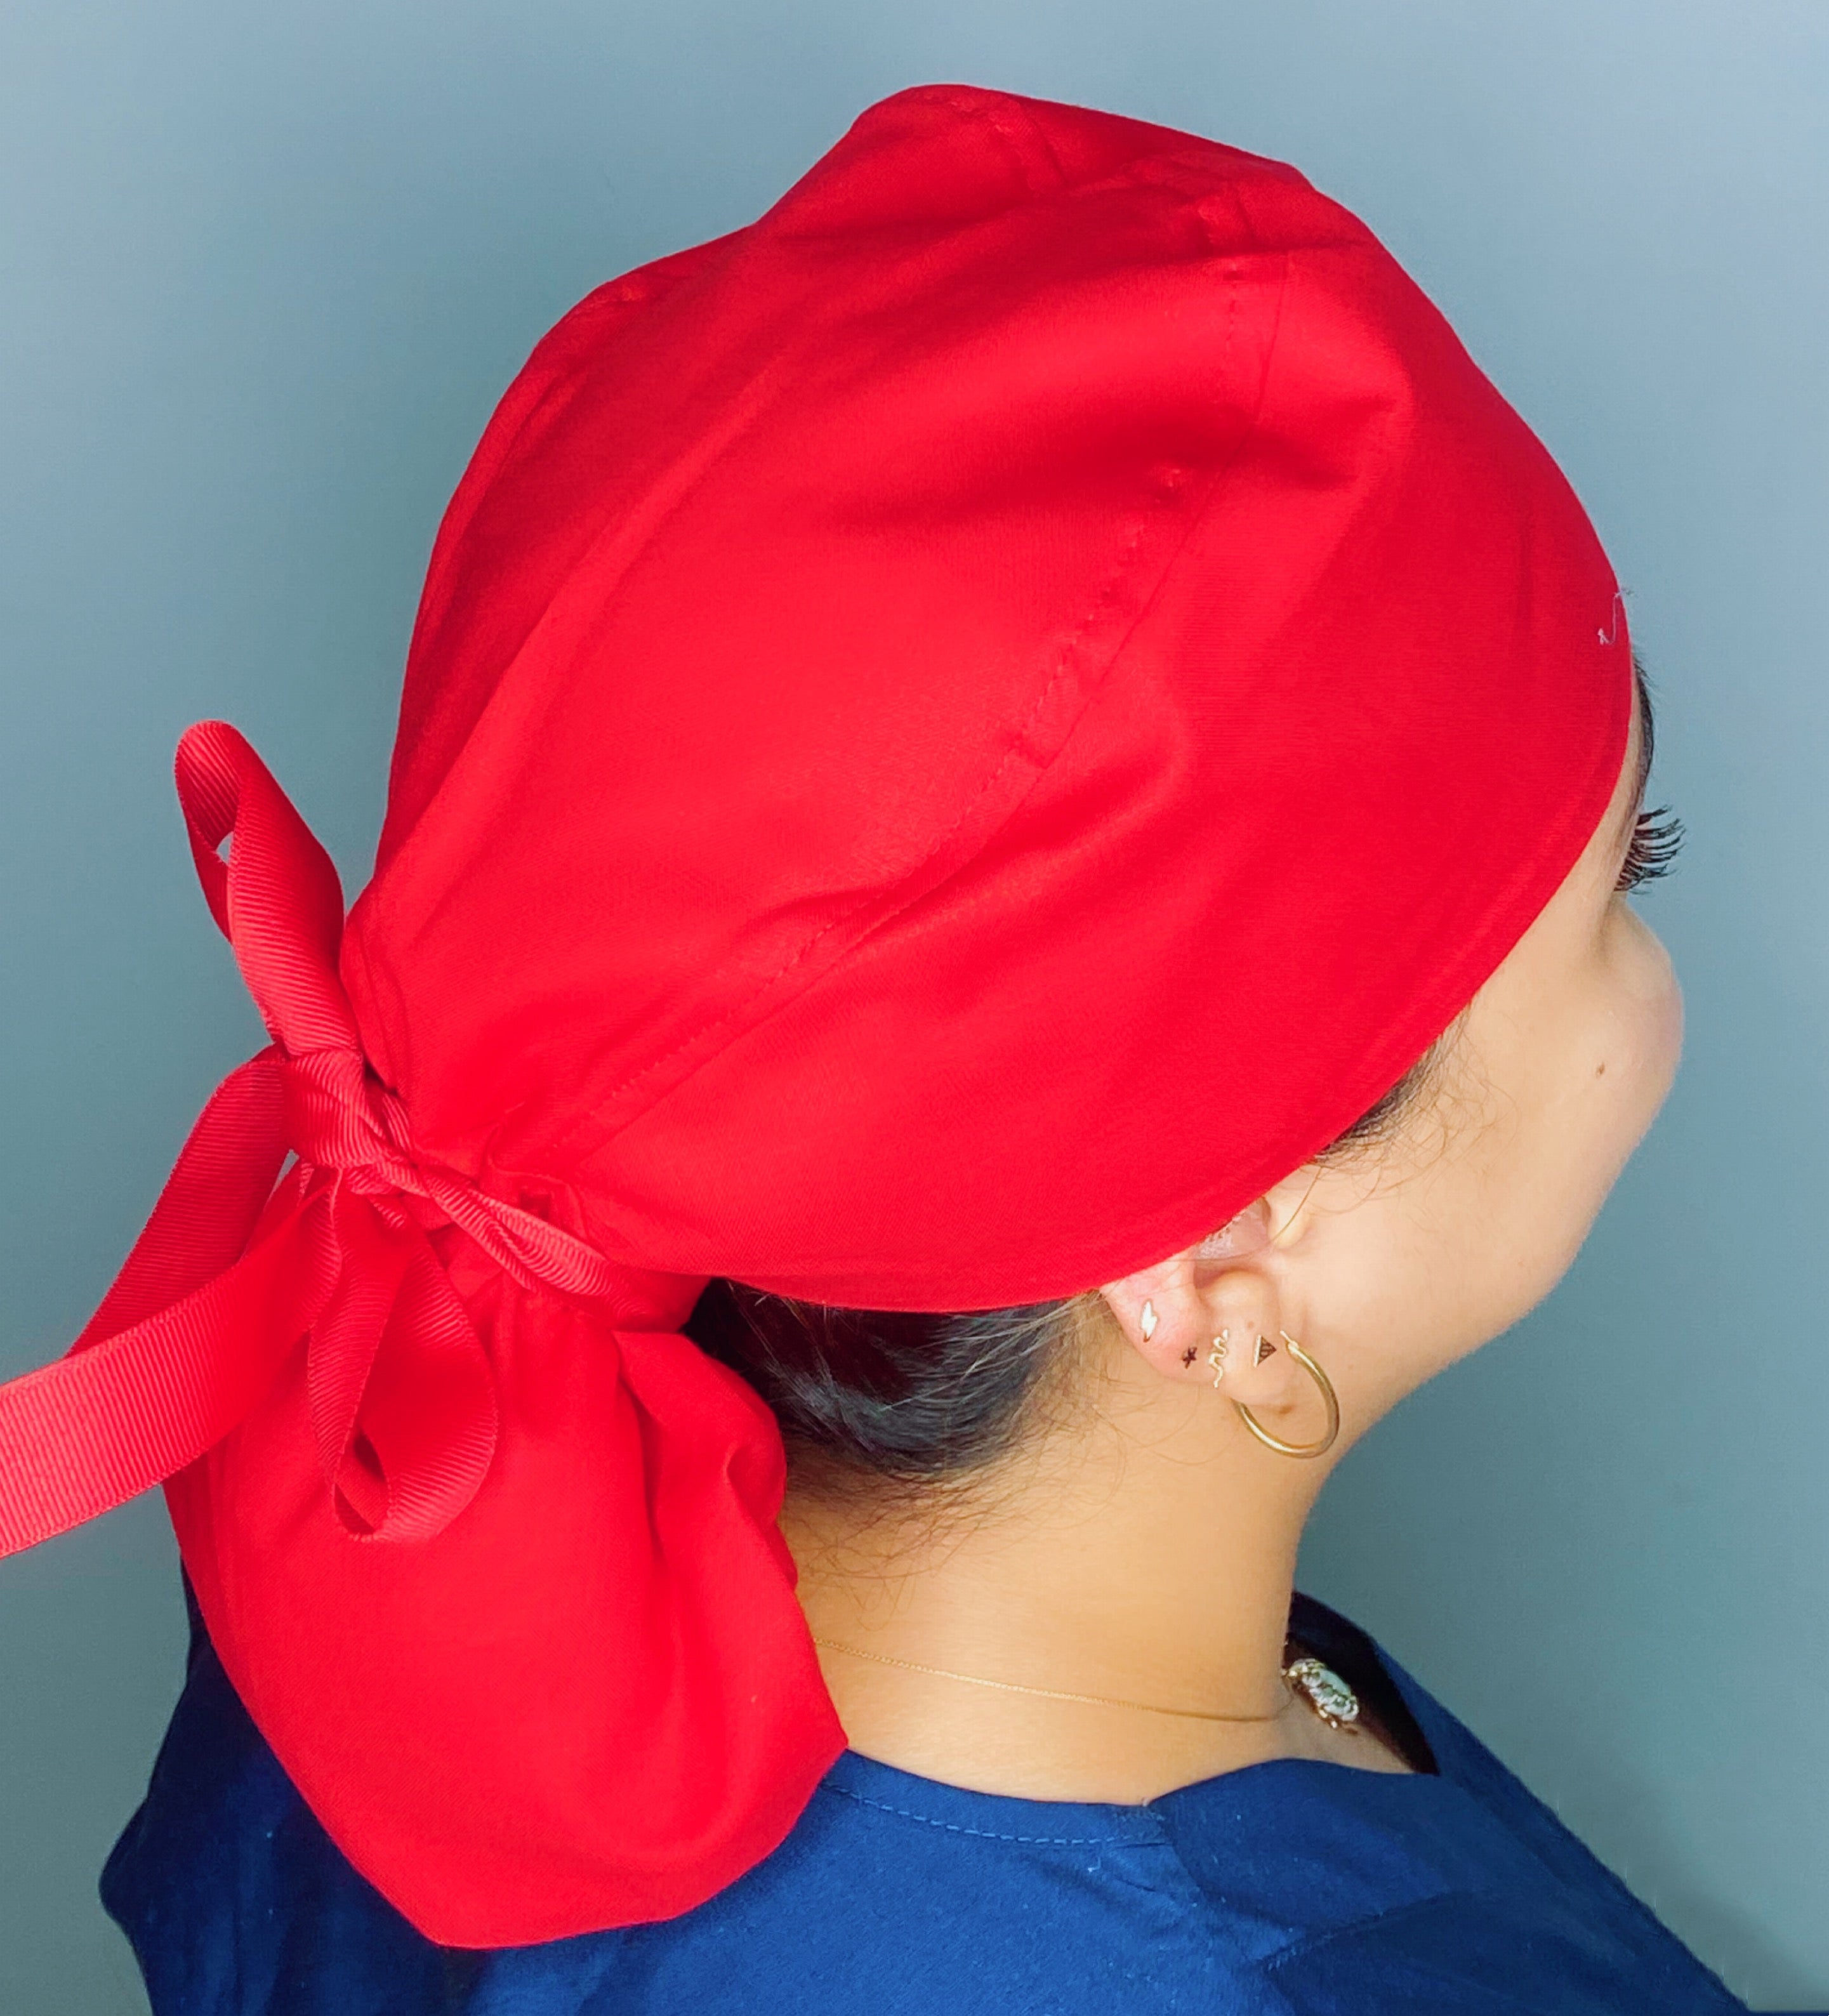 Wife Mom Nurse Themed Solid Color Ponytail